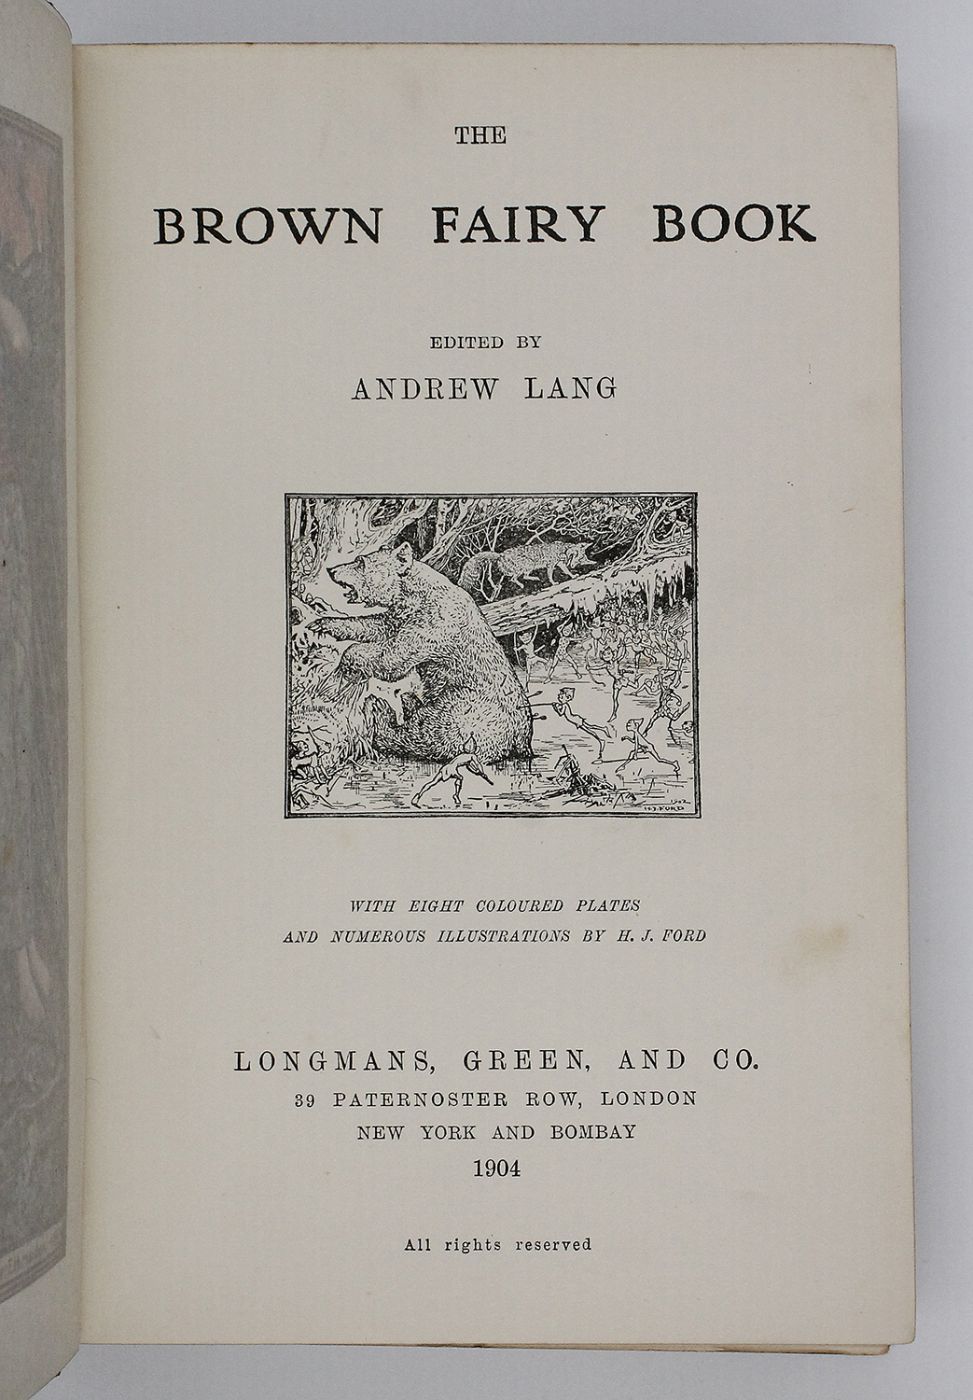 THE BROWN FAIRY BOOK -  image 4